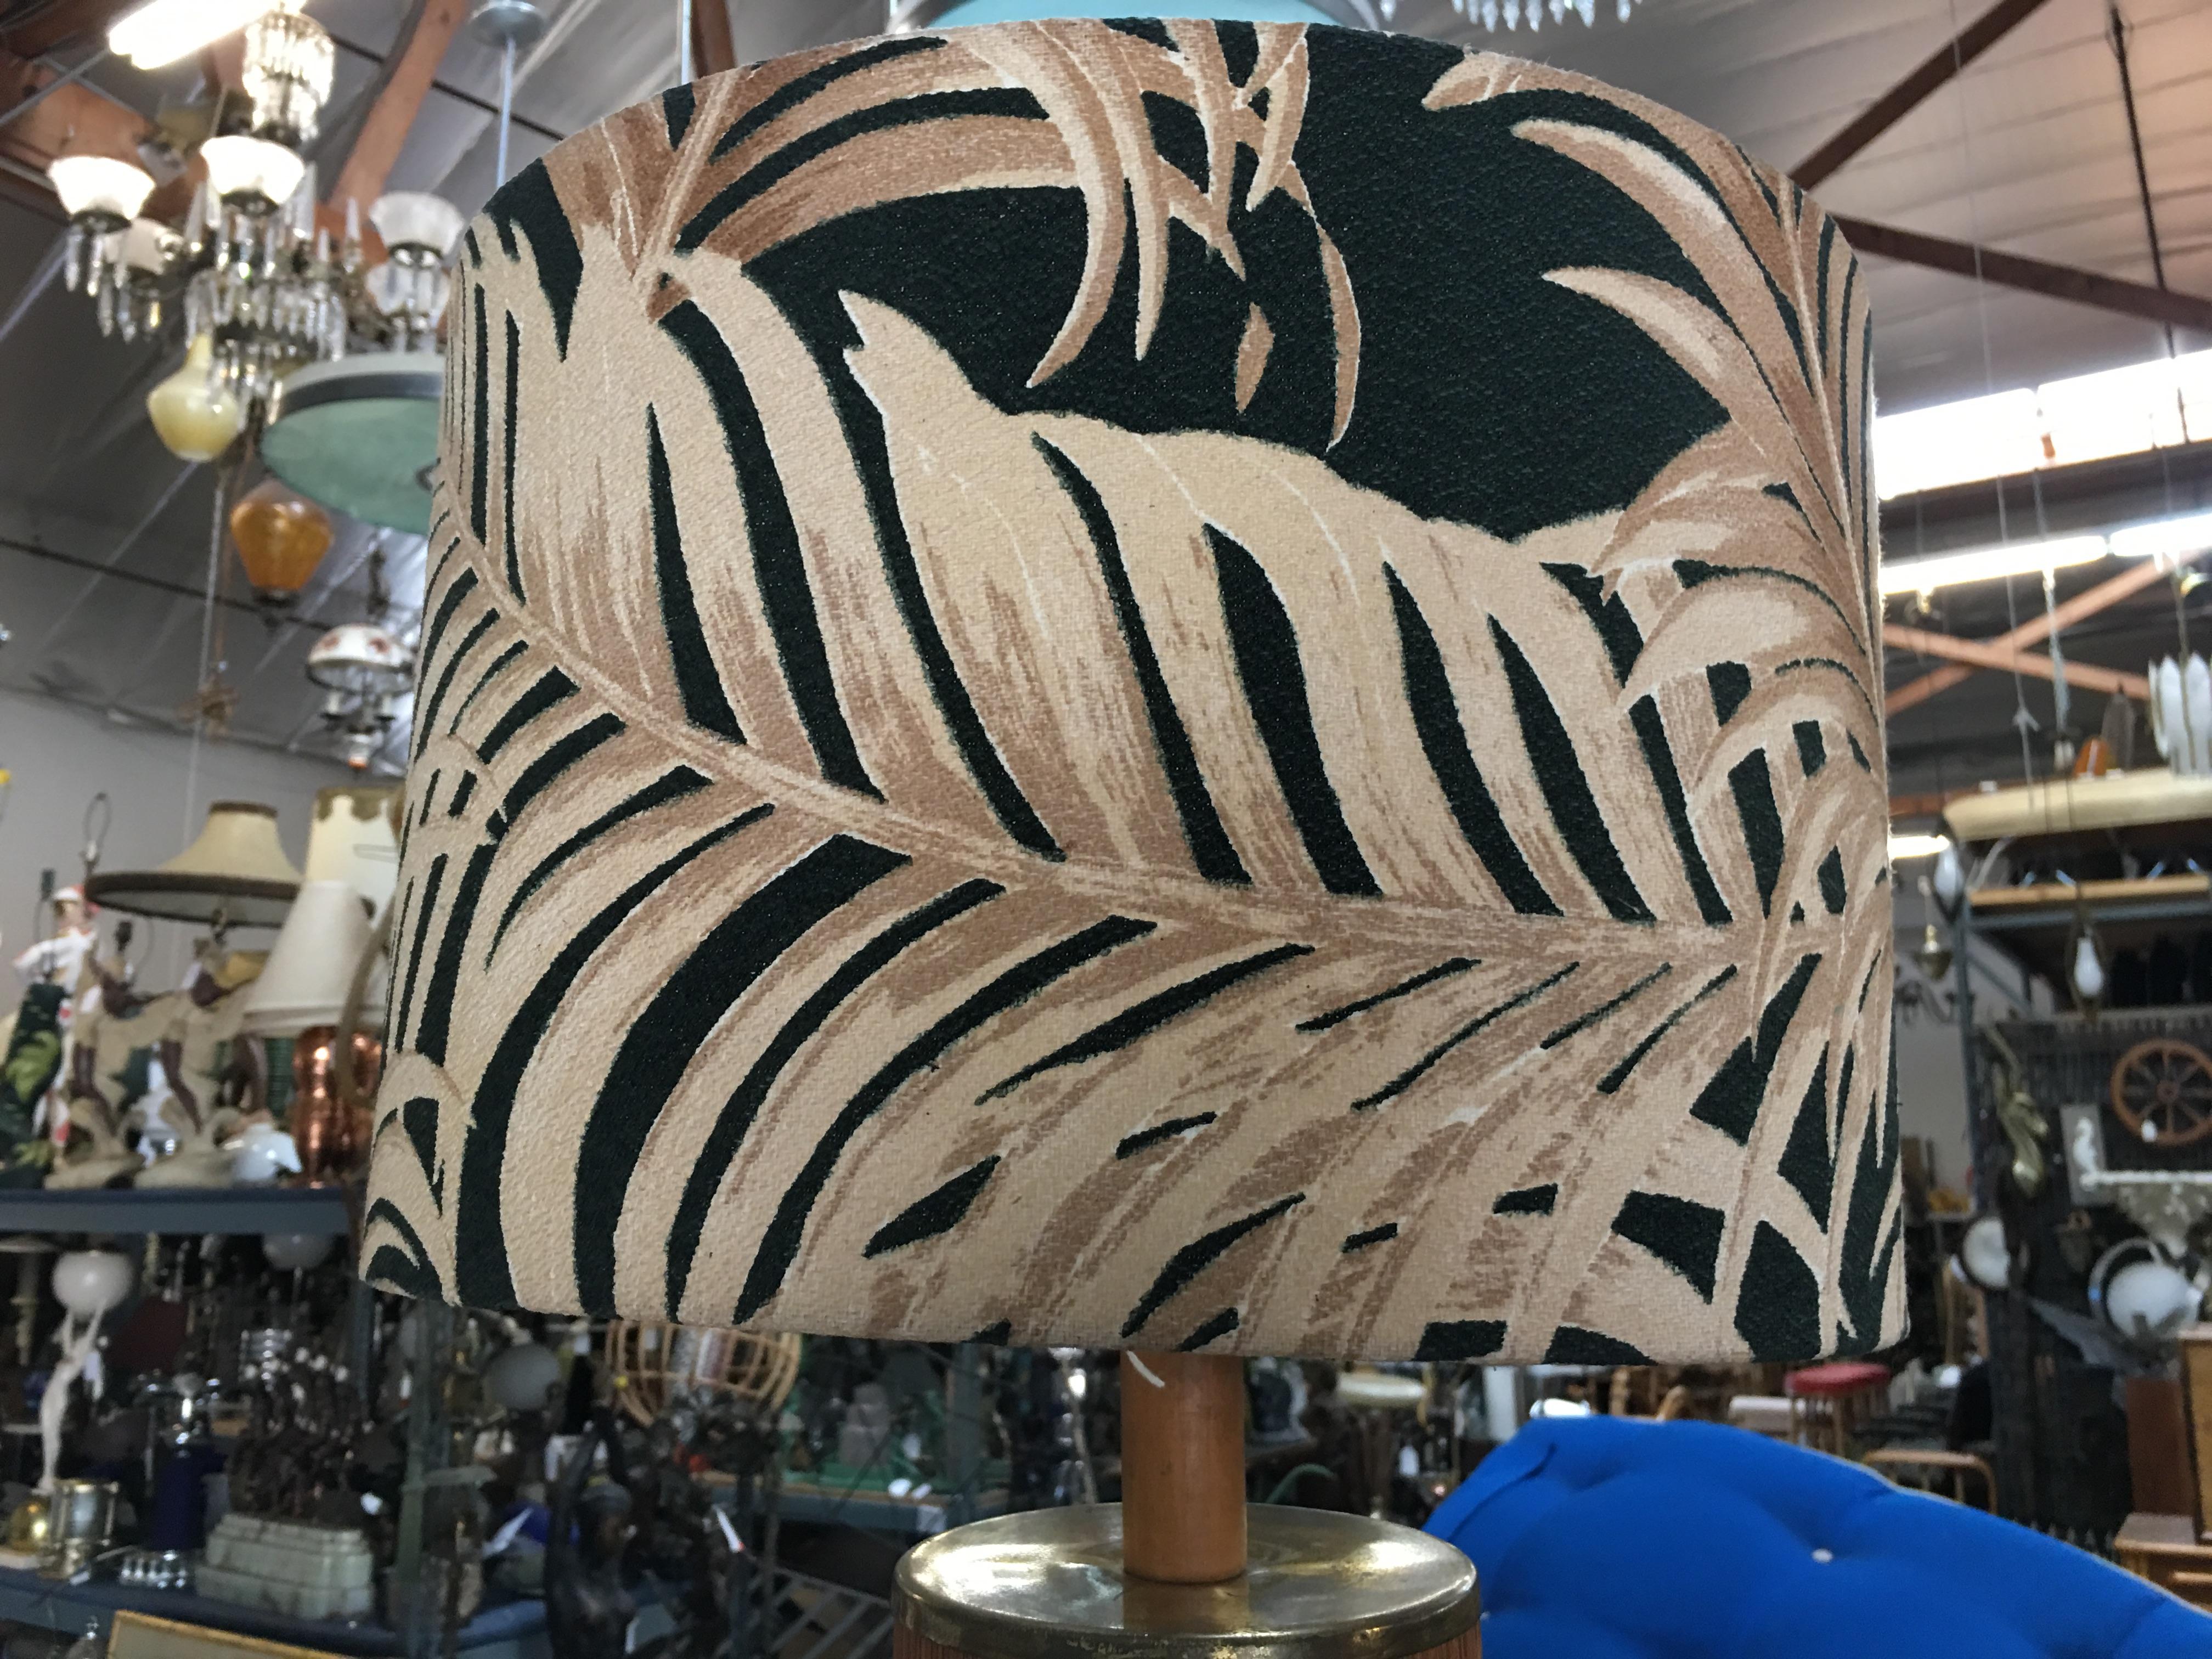 Midcentury Tropical lamp featuring a light stained oak base wrapped in decorative strung Bamboo with a top brass cap. The lamp comes with its original Fabric Palm Leaf Shade by Spectrum fabrics.